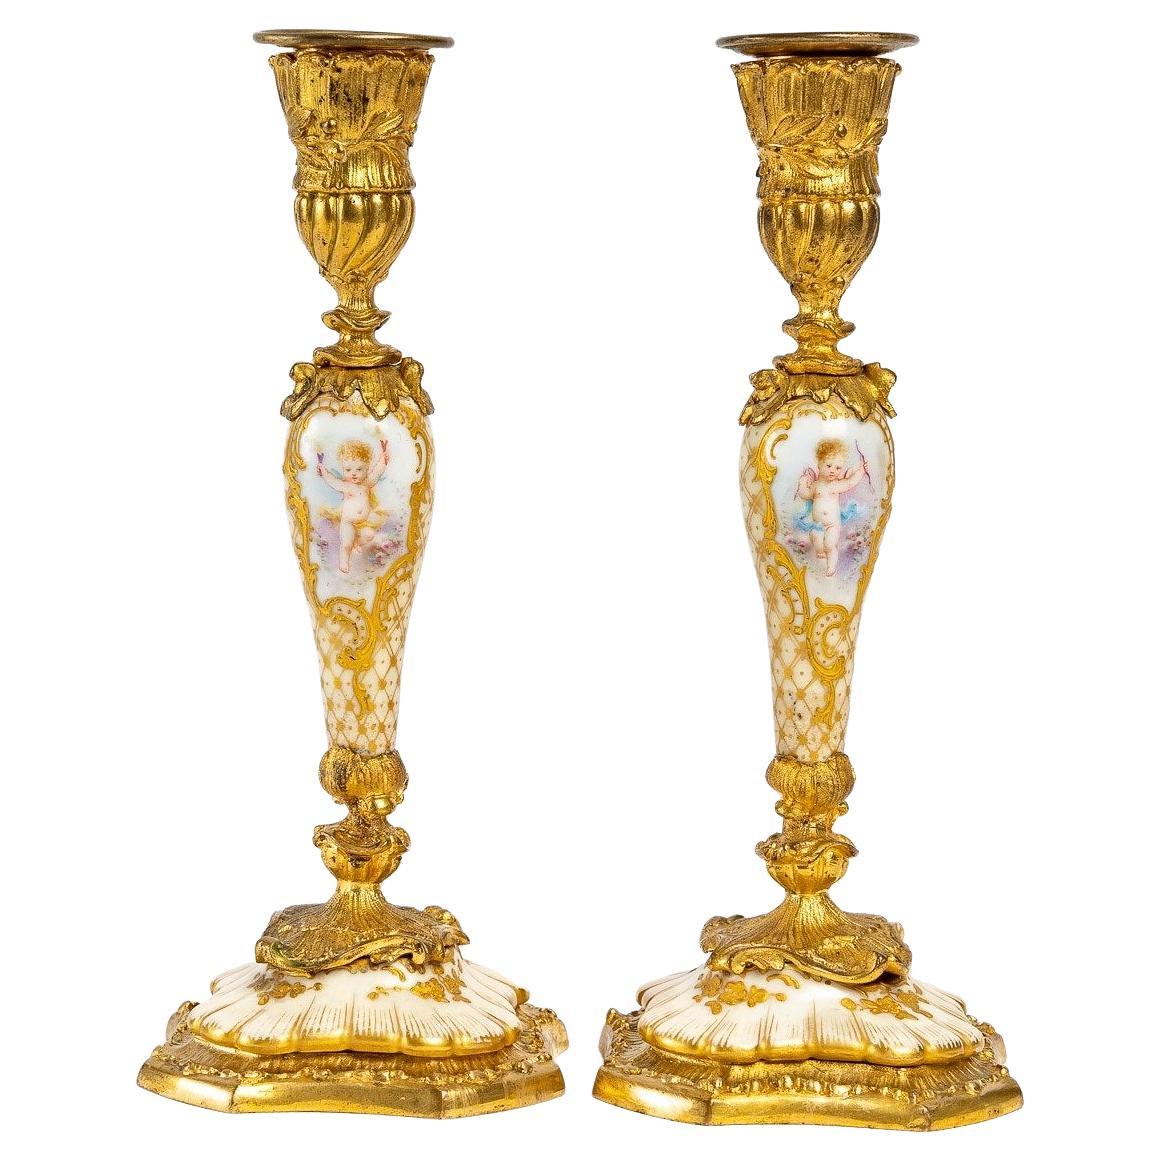 Pair of Gilt Bronze and Porcelain Candlesticks, Louis XV Style